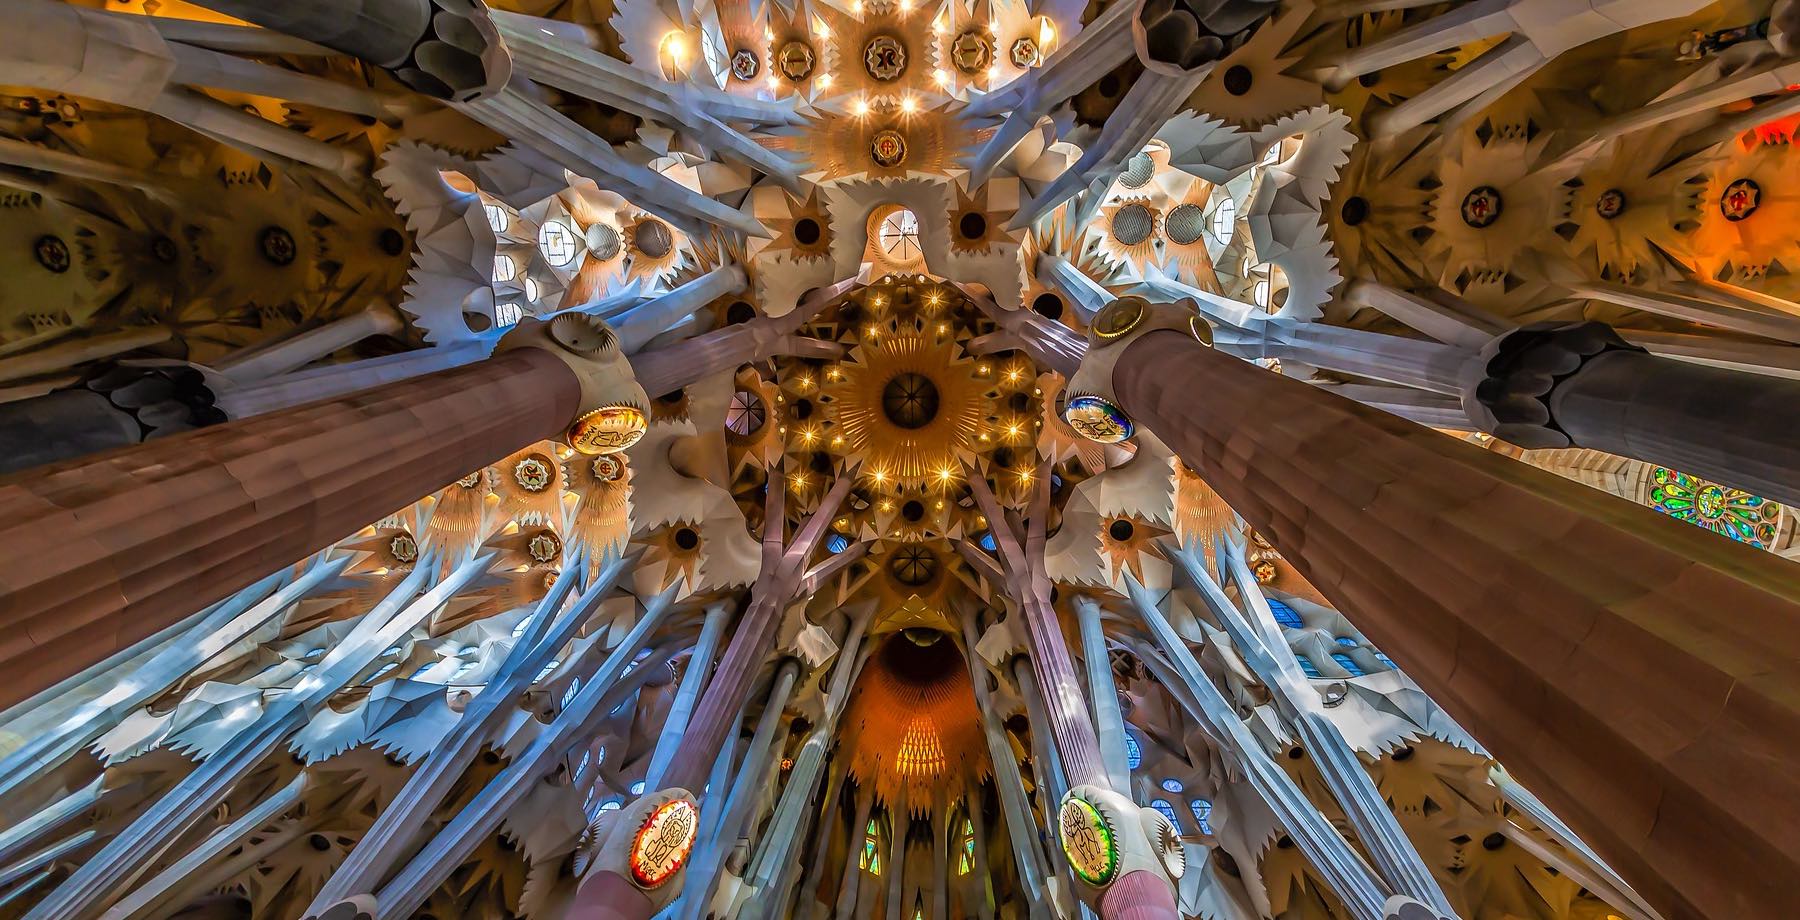 Artsy, quirky, and fun is part of the Barcelona experience.